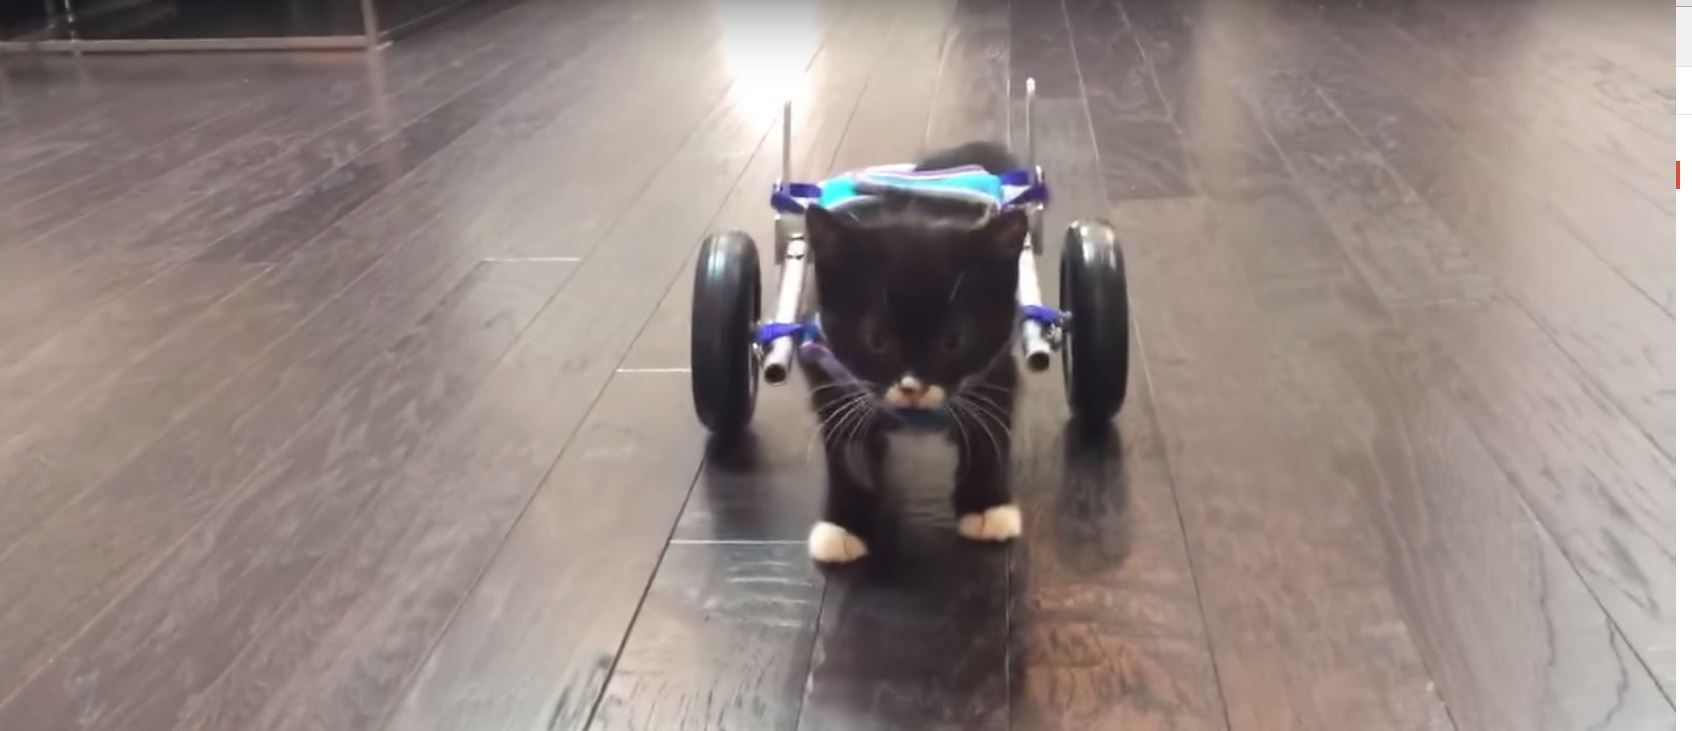 Video of Miracle Kitten Learning to Use Wheelchair is The Best